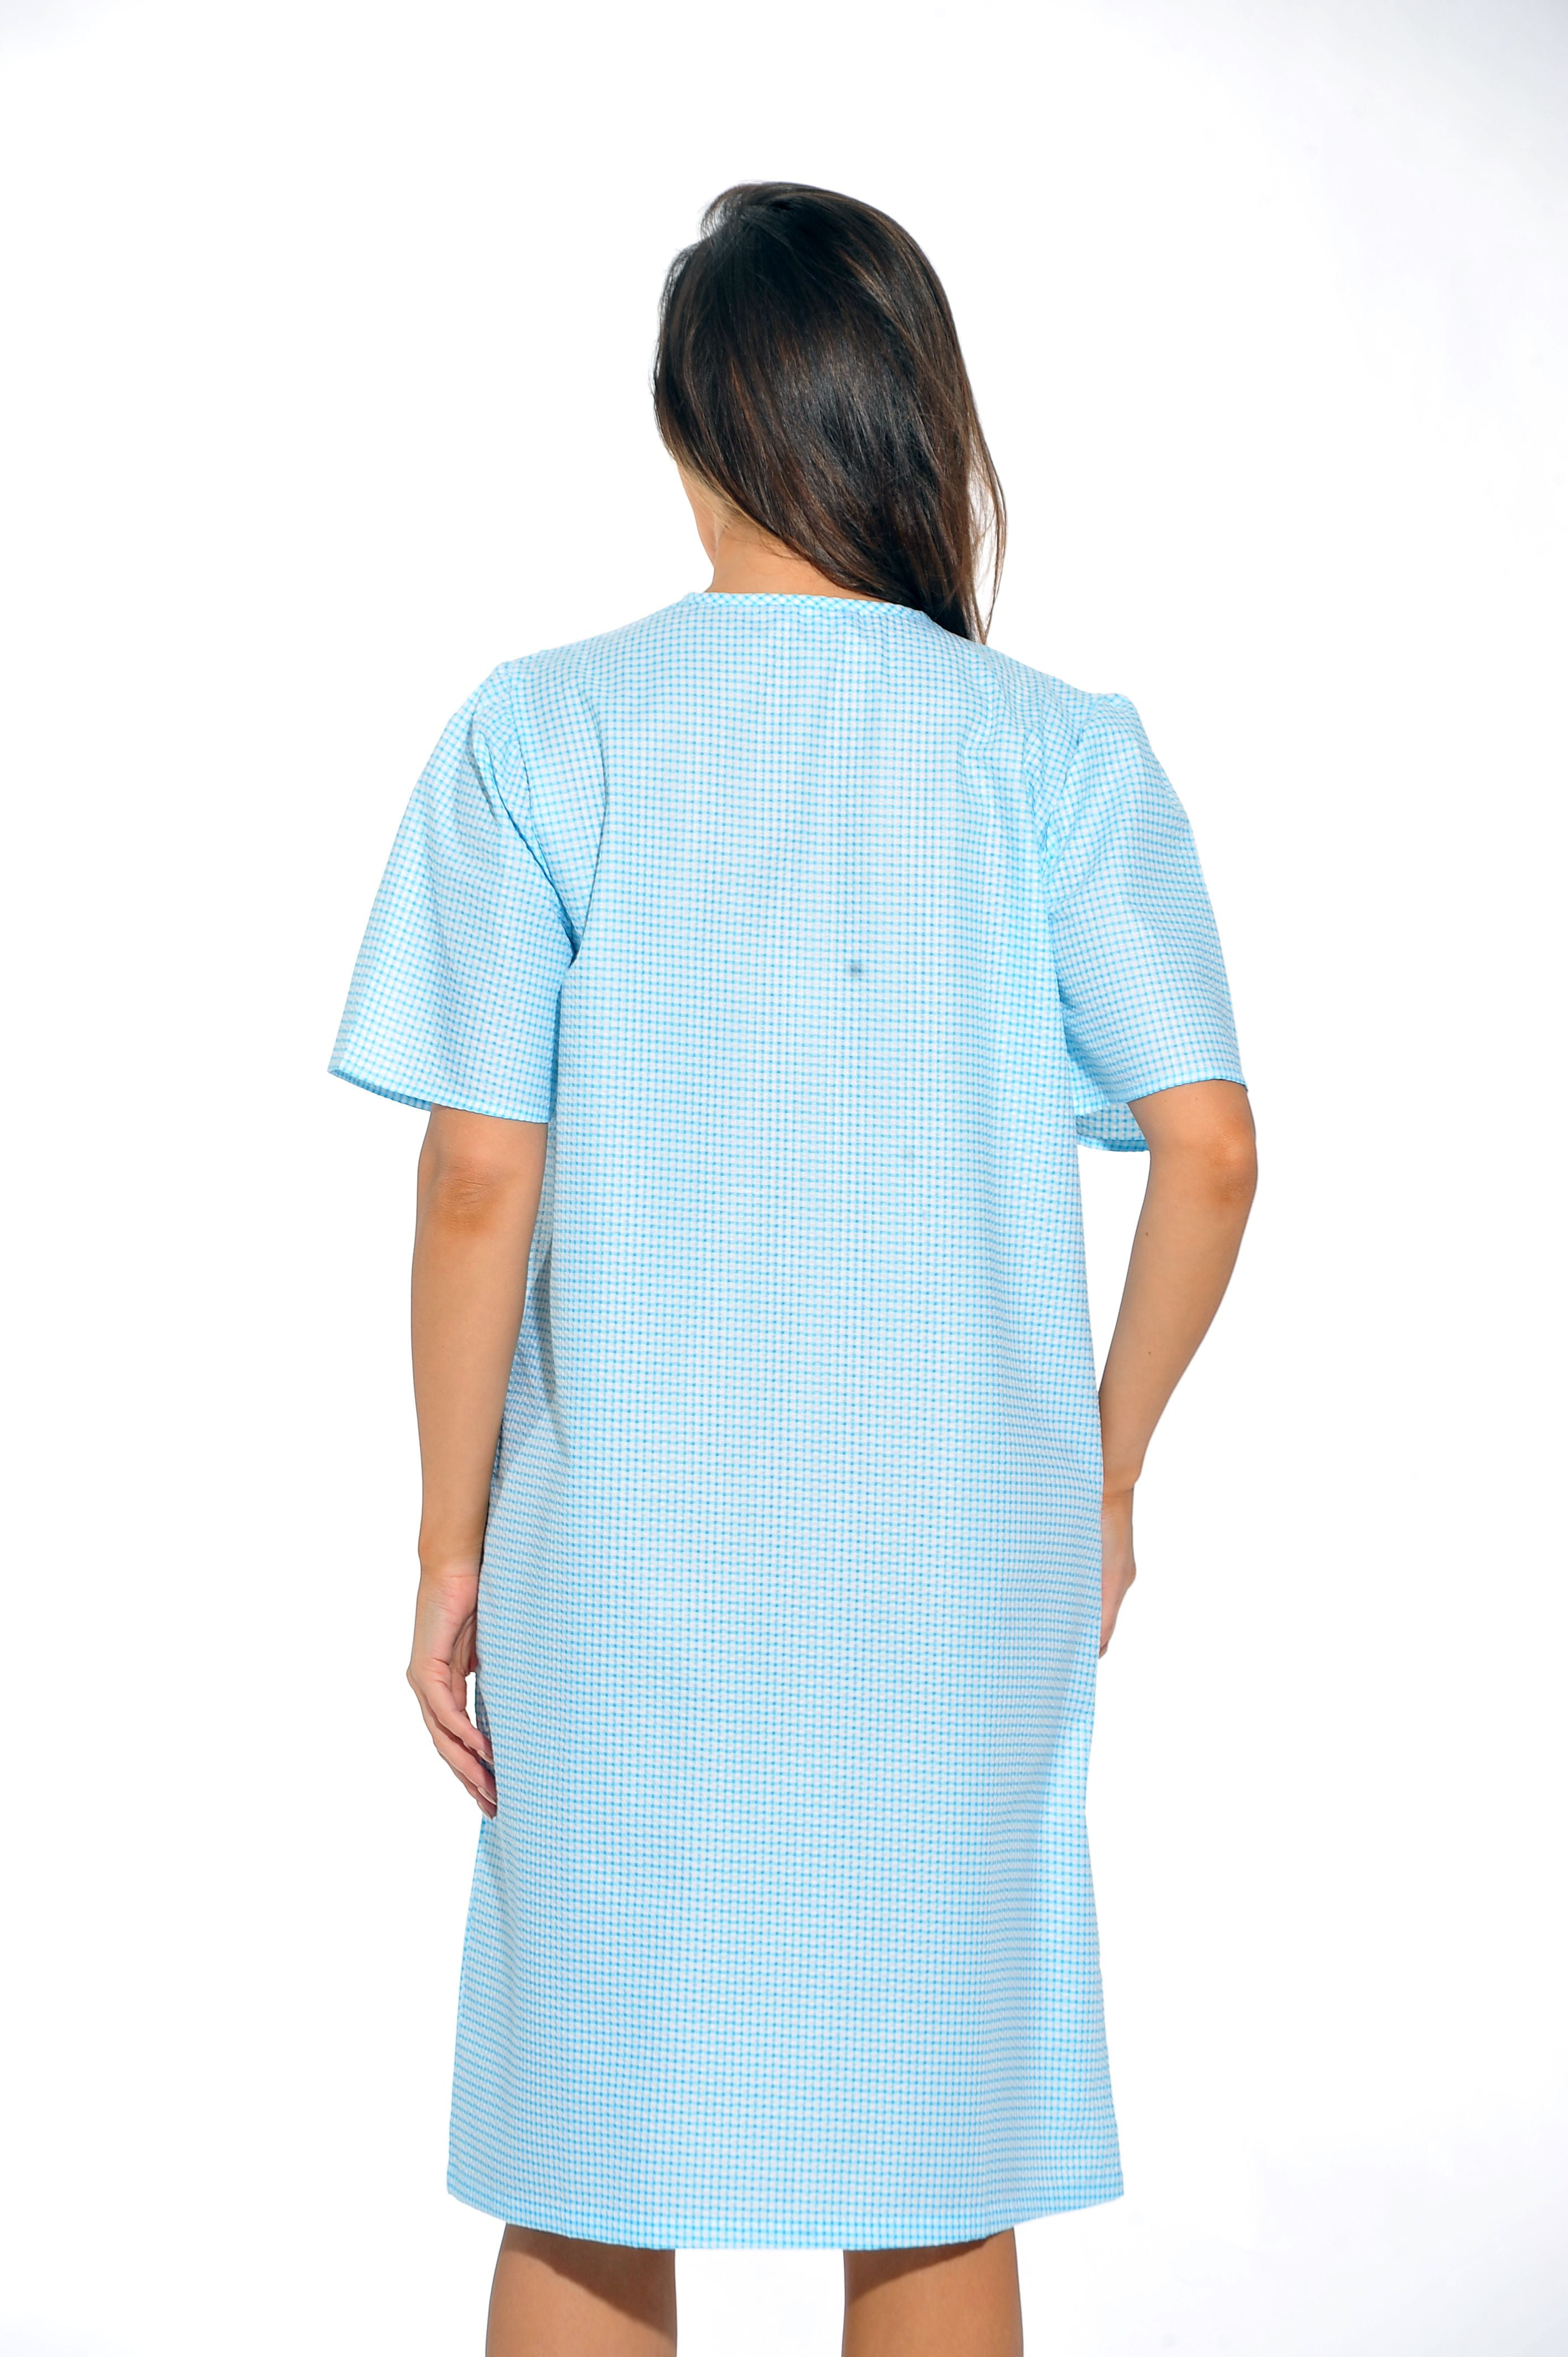 Dreamcrest Women Short Sleeve Housecoat - Comfortable Loungewear for Sleep  and Relaxation (Blue, 1X) 